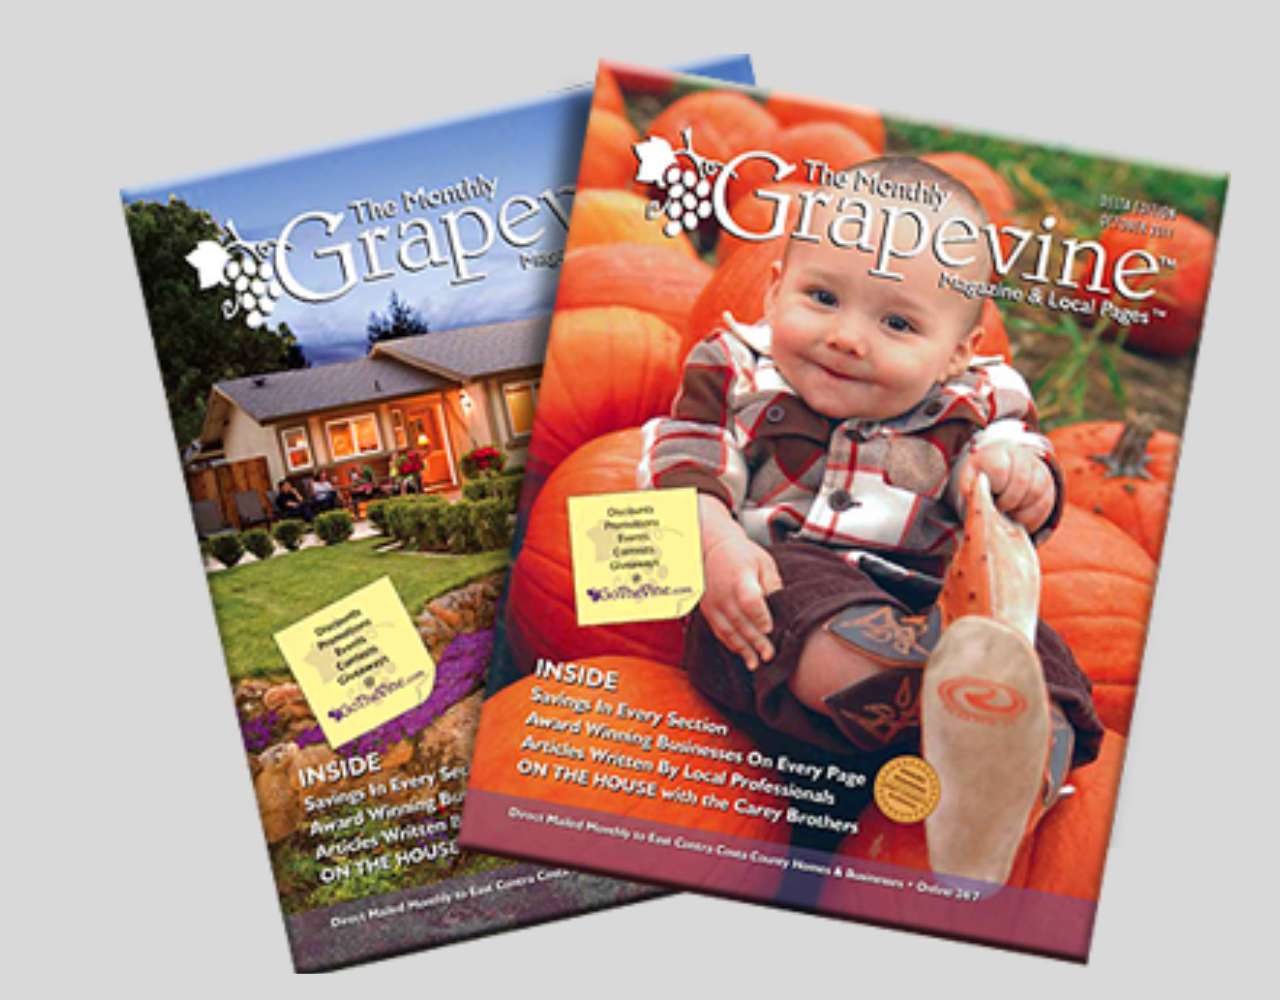 Maximize your exposure with The Monthly Grapevine